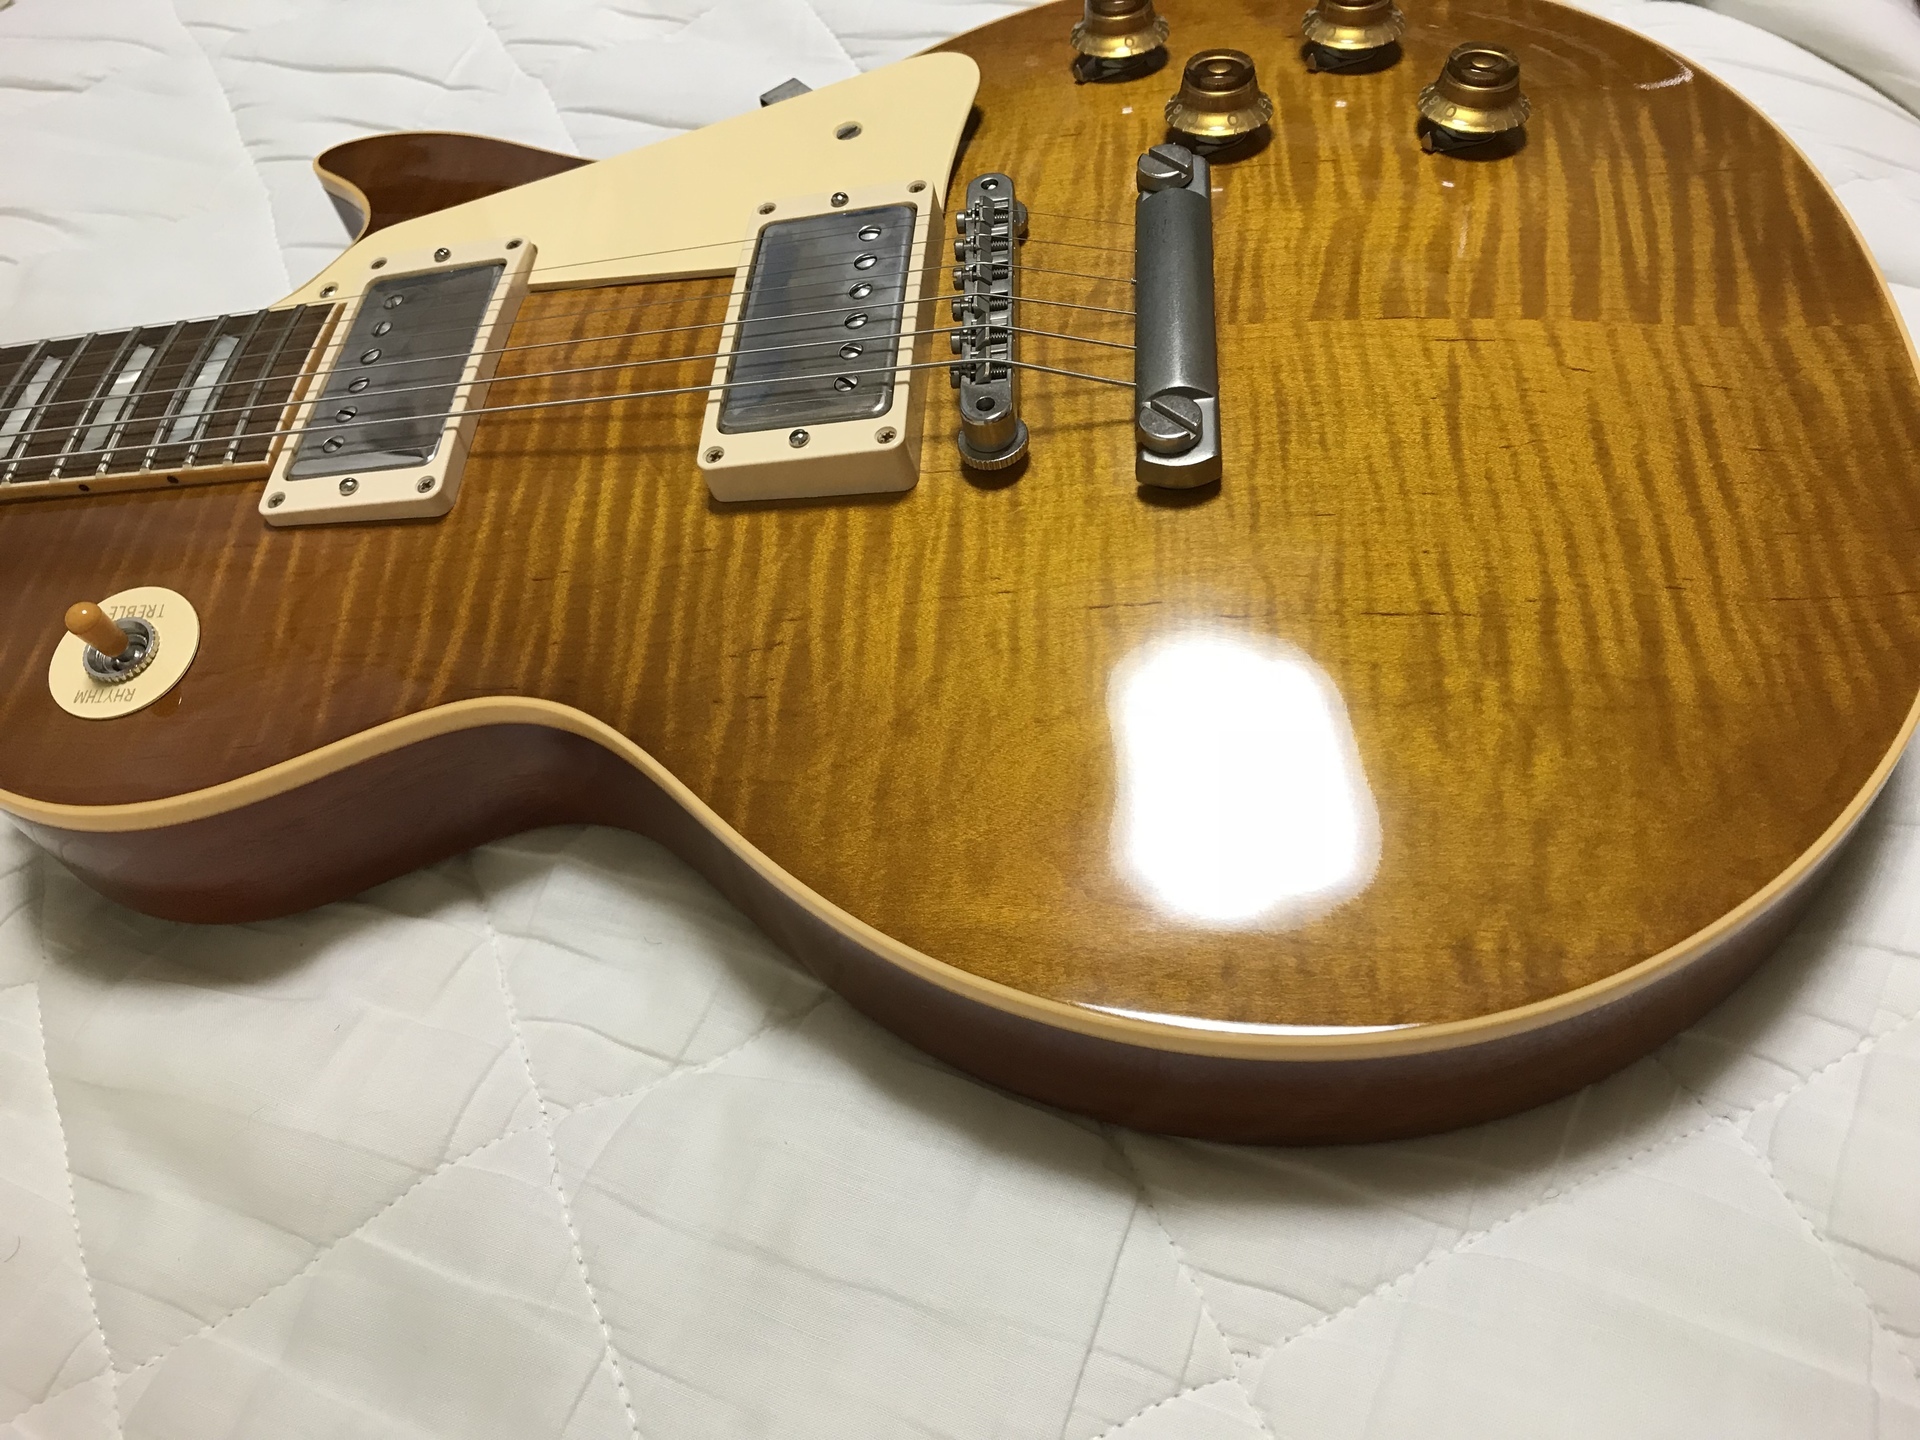 Epiphone by GIBSON Les paul 極上杢目 トラ目 - エレキギター